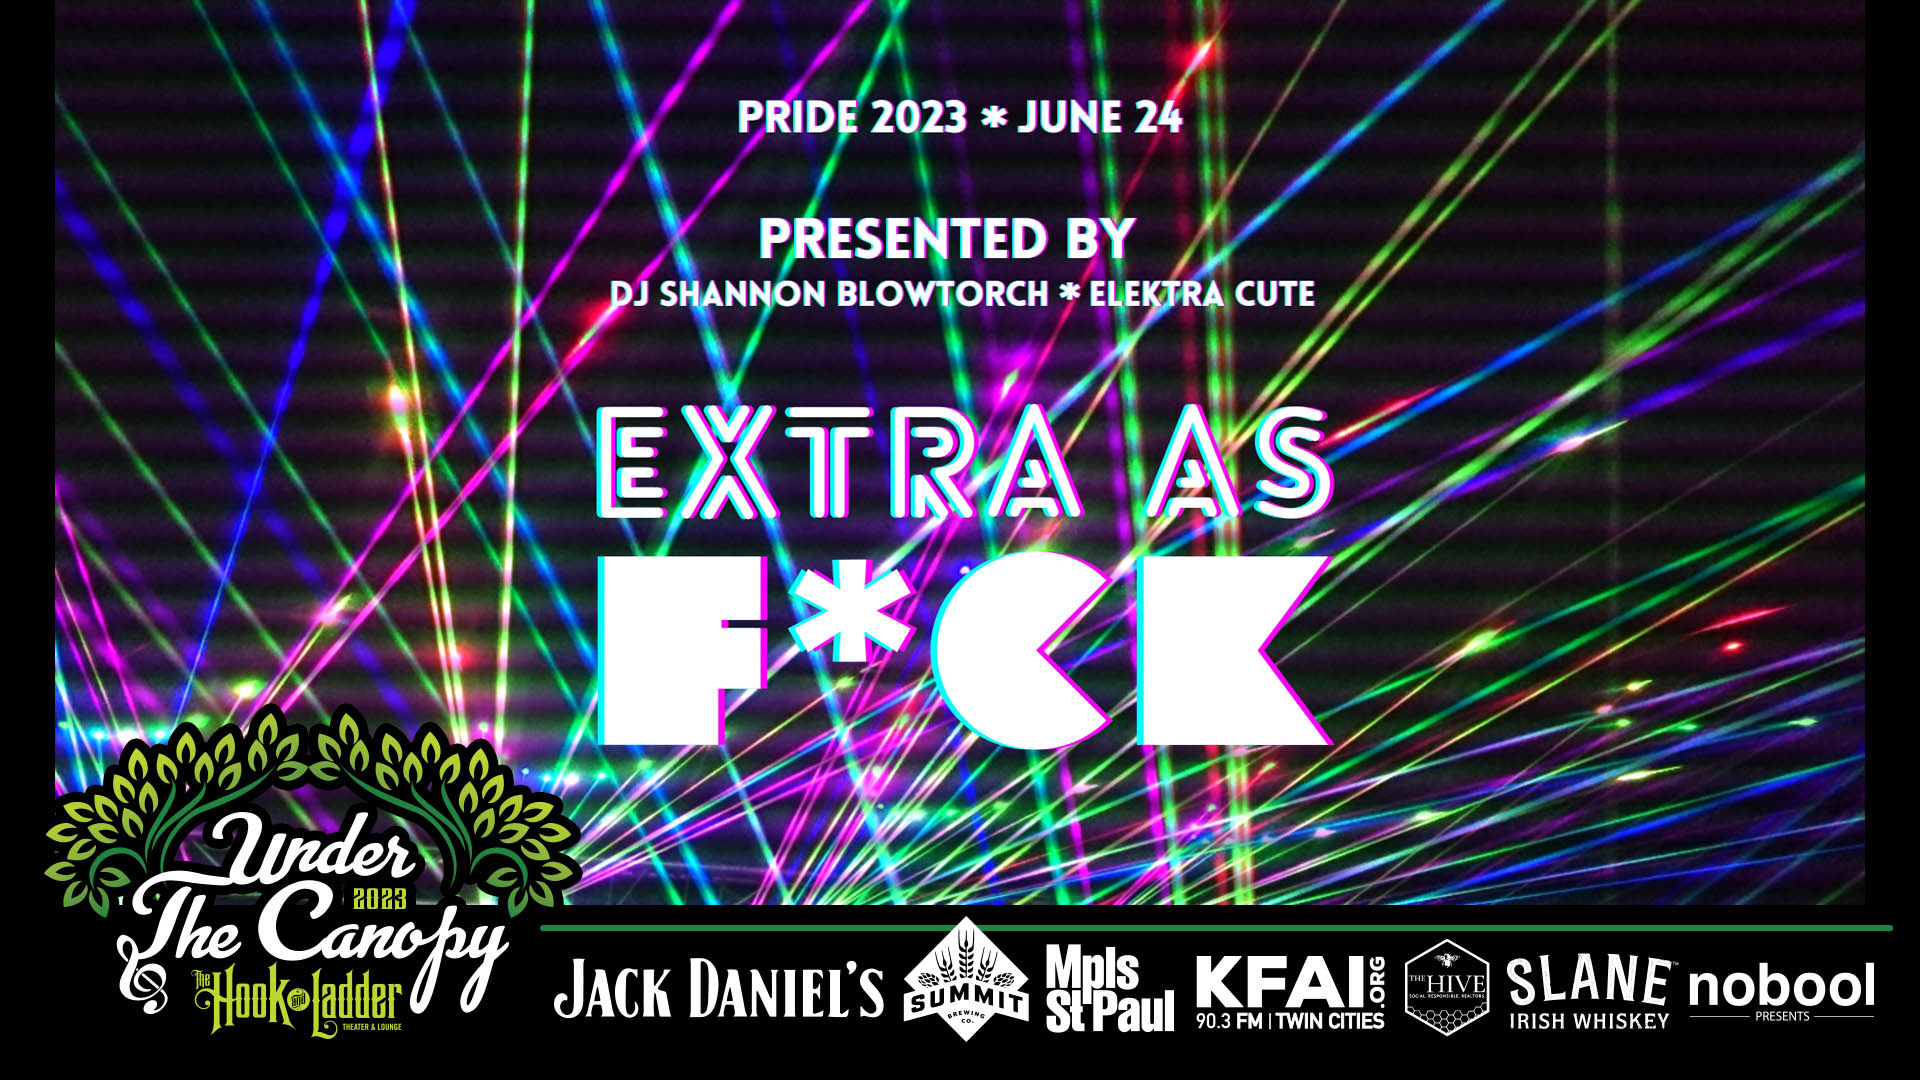 EXTRA AS F*CK Presented by DJ Shannon Blowtorch & Elektra Cute * PRIDE 2023 * Saturday, June 24 Under The Canopy at The Hook and Ladder Theater "An Urban Outdoor Summer Concert Series" Doors 9:30pm :: Music 9:30pm :: 21+ VIP: $75 (Includes ) GA: $25 ADV / $30 DOS